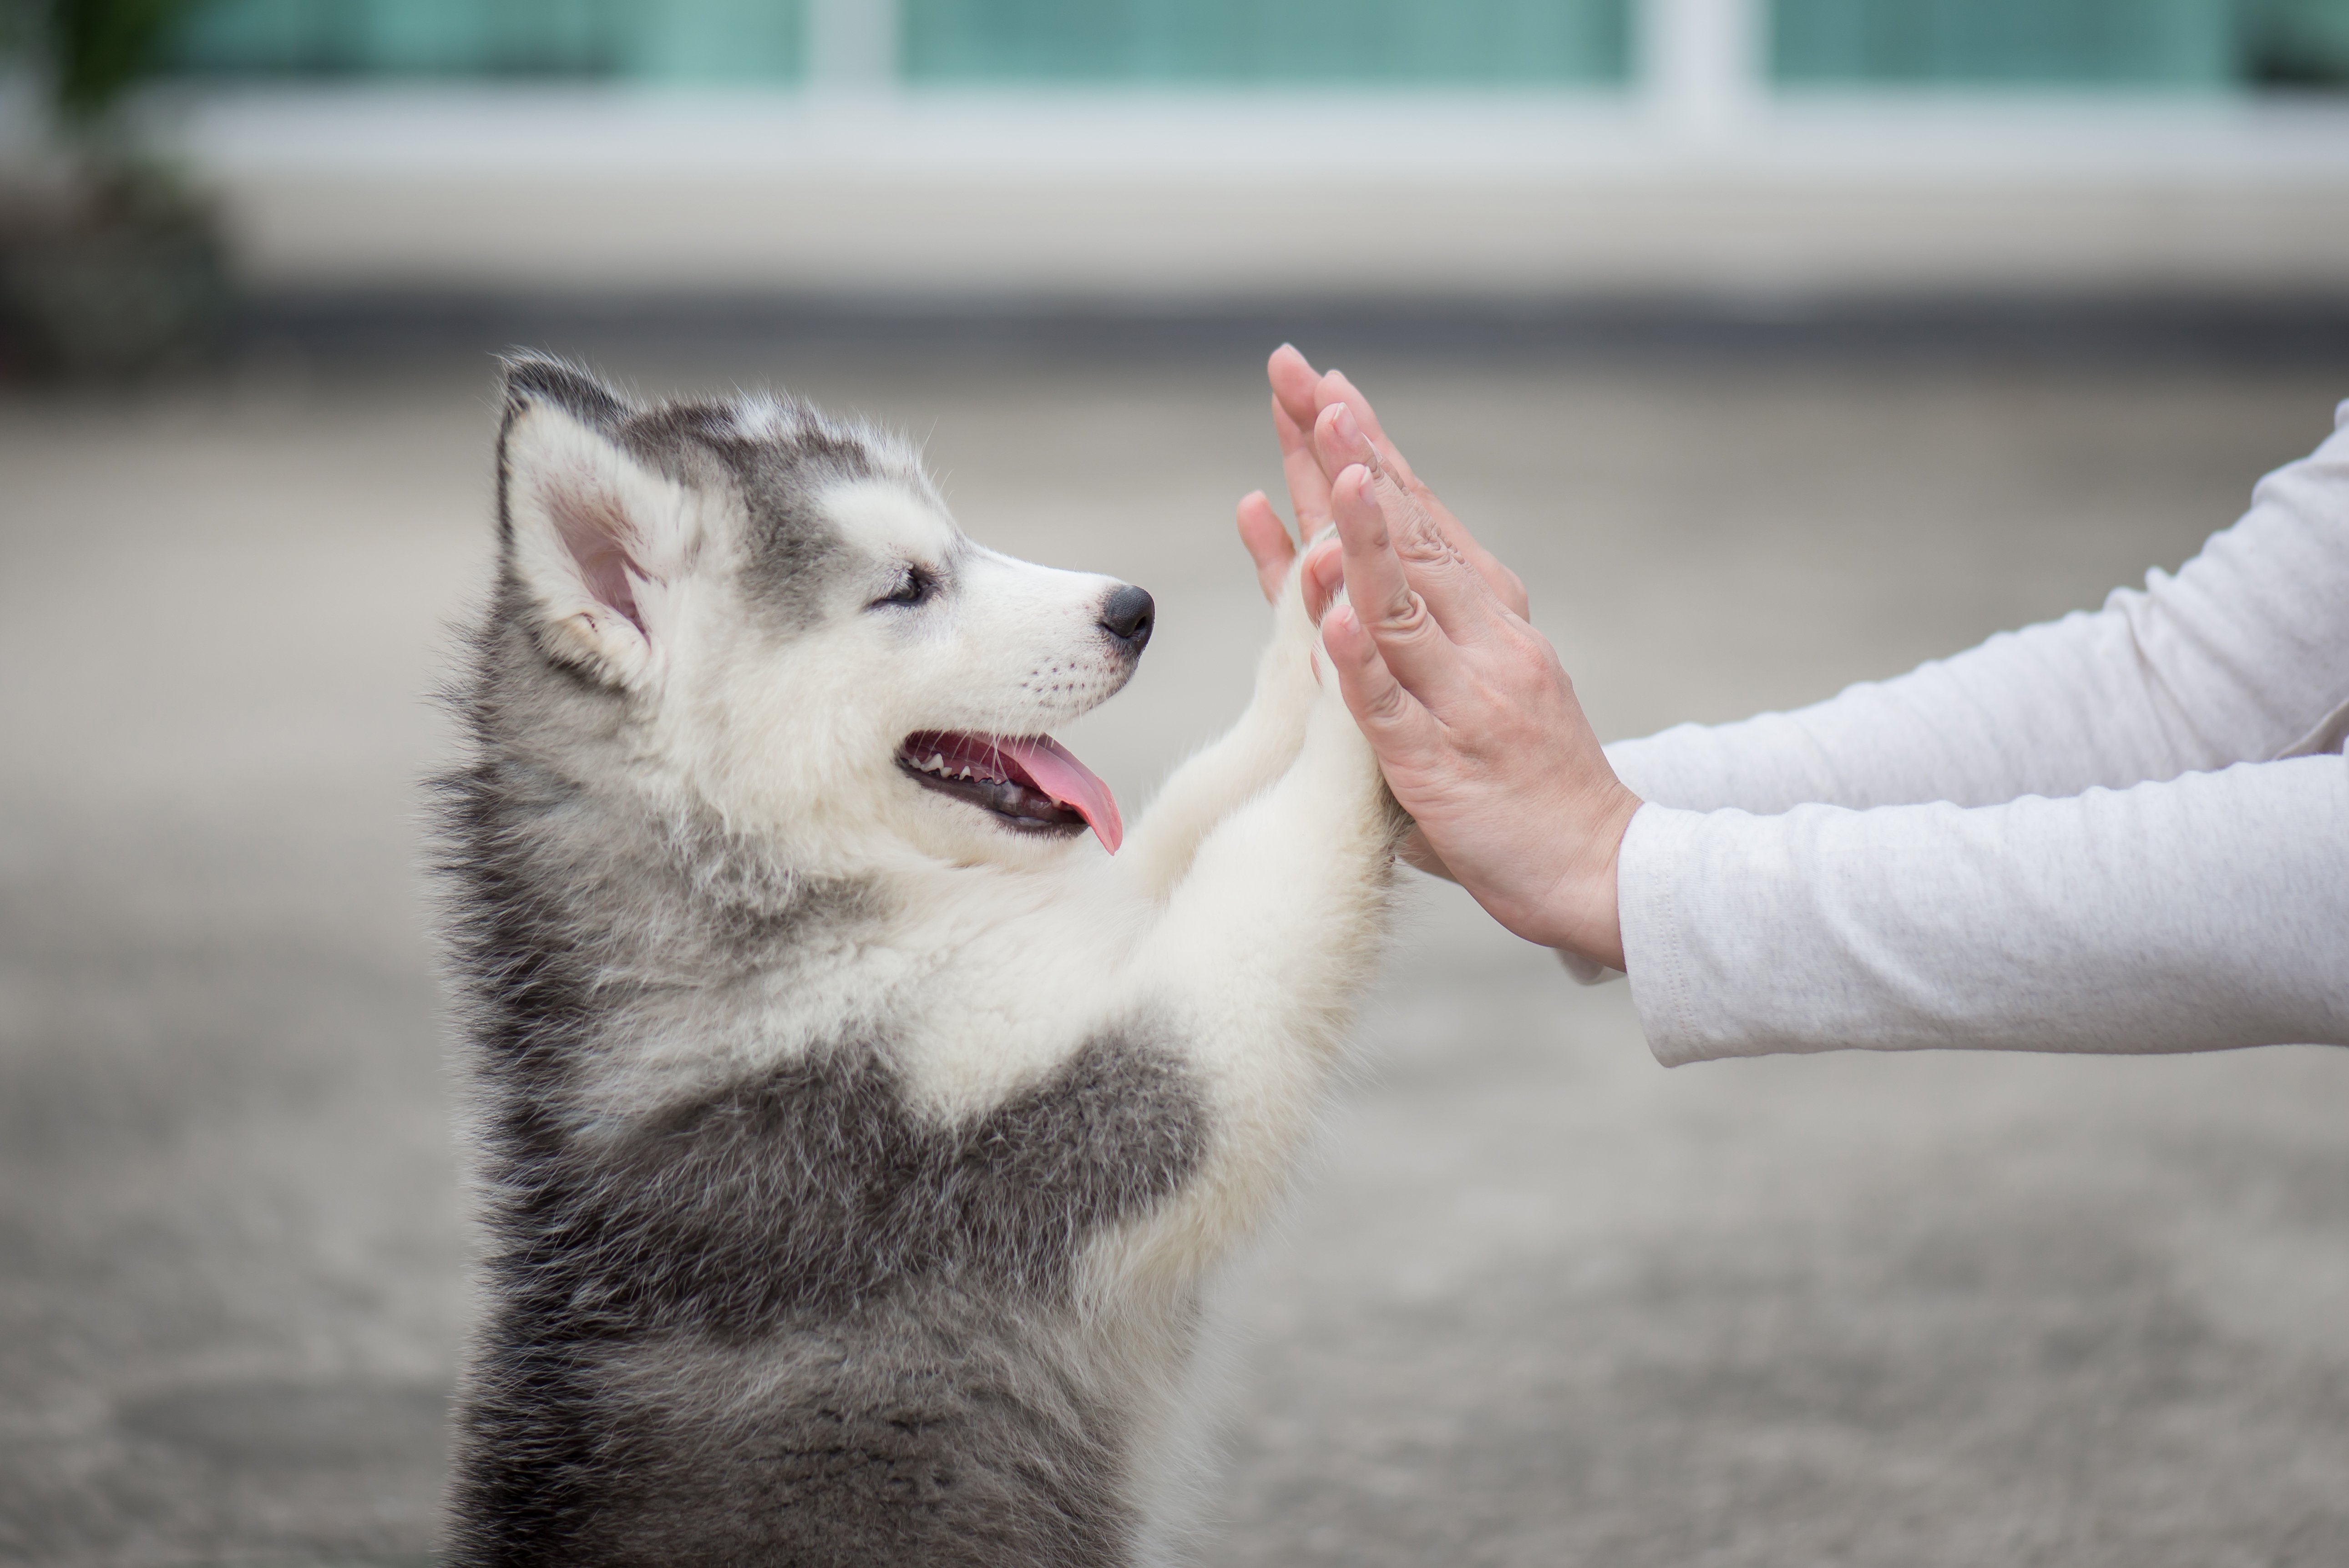 A smiling husky puppy high-fives a pair of hands.  